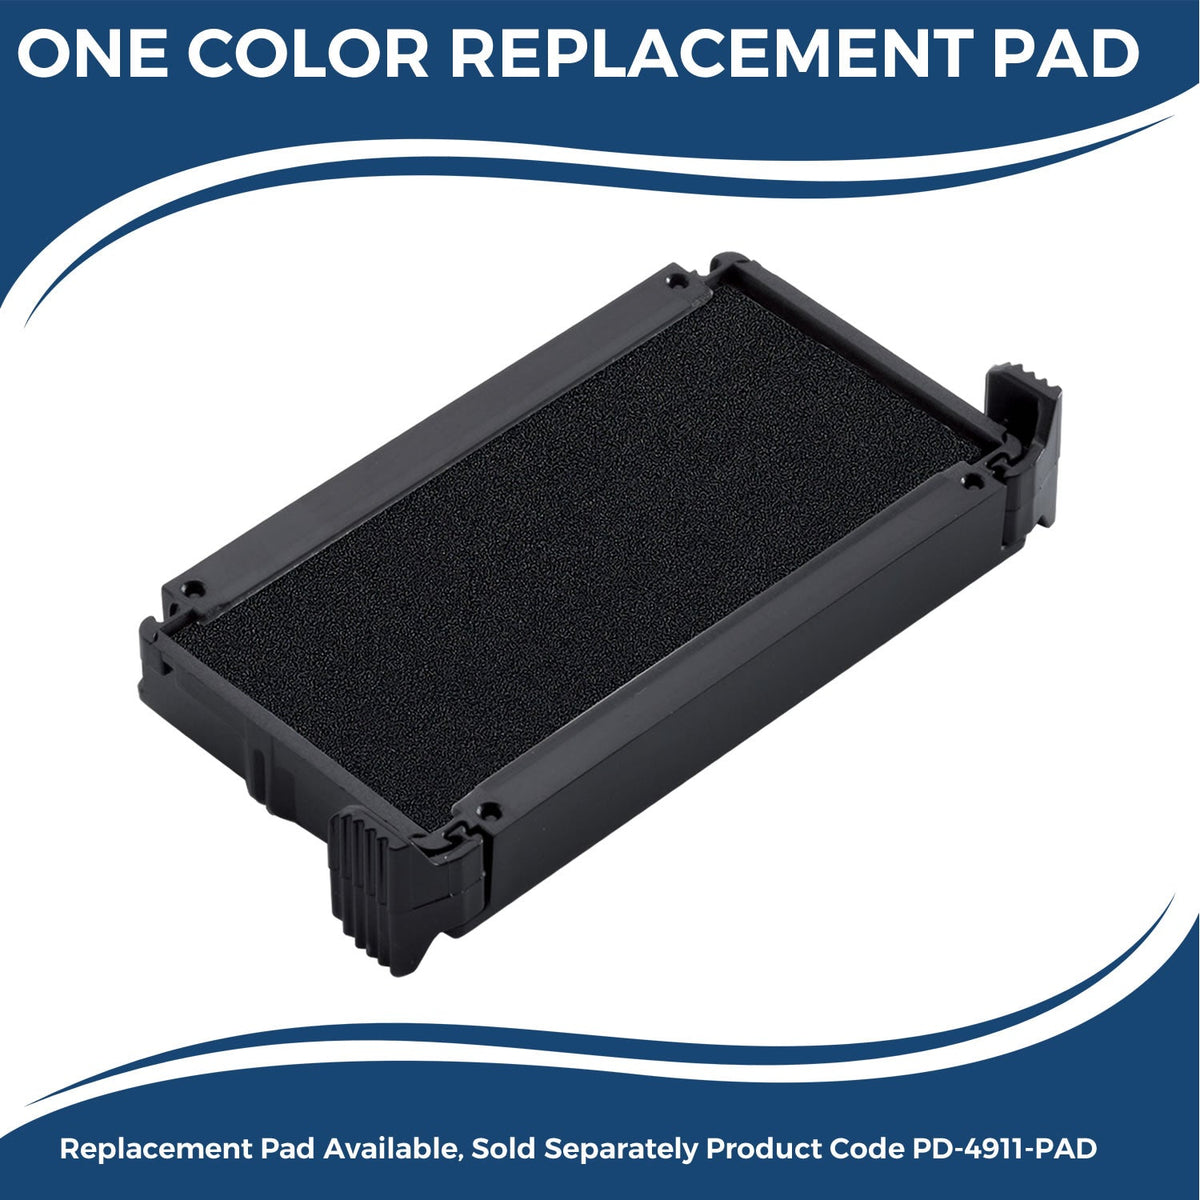 Replacement Pad for Self-Inking Revisado Stamp